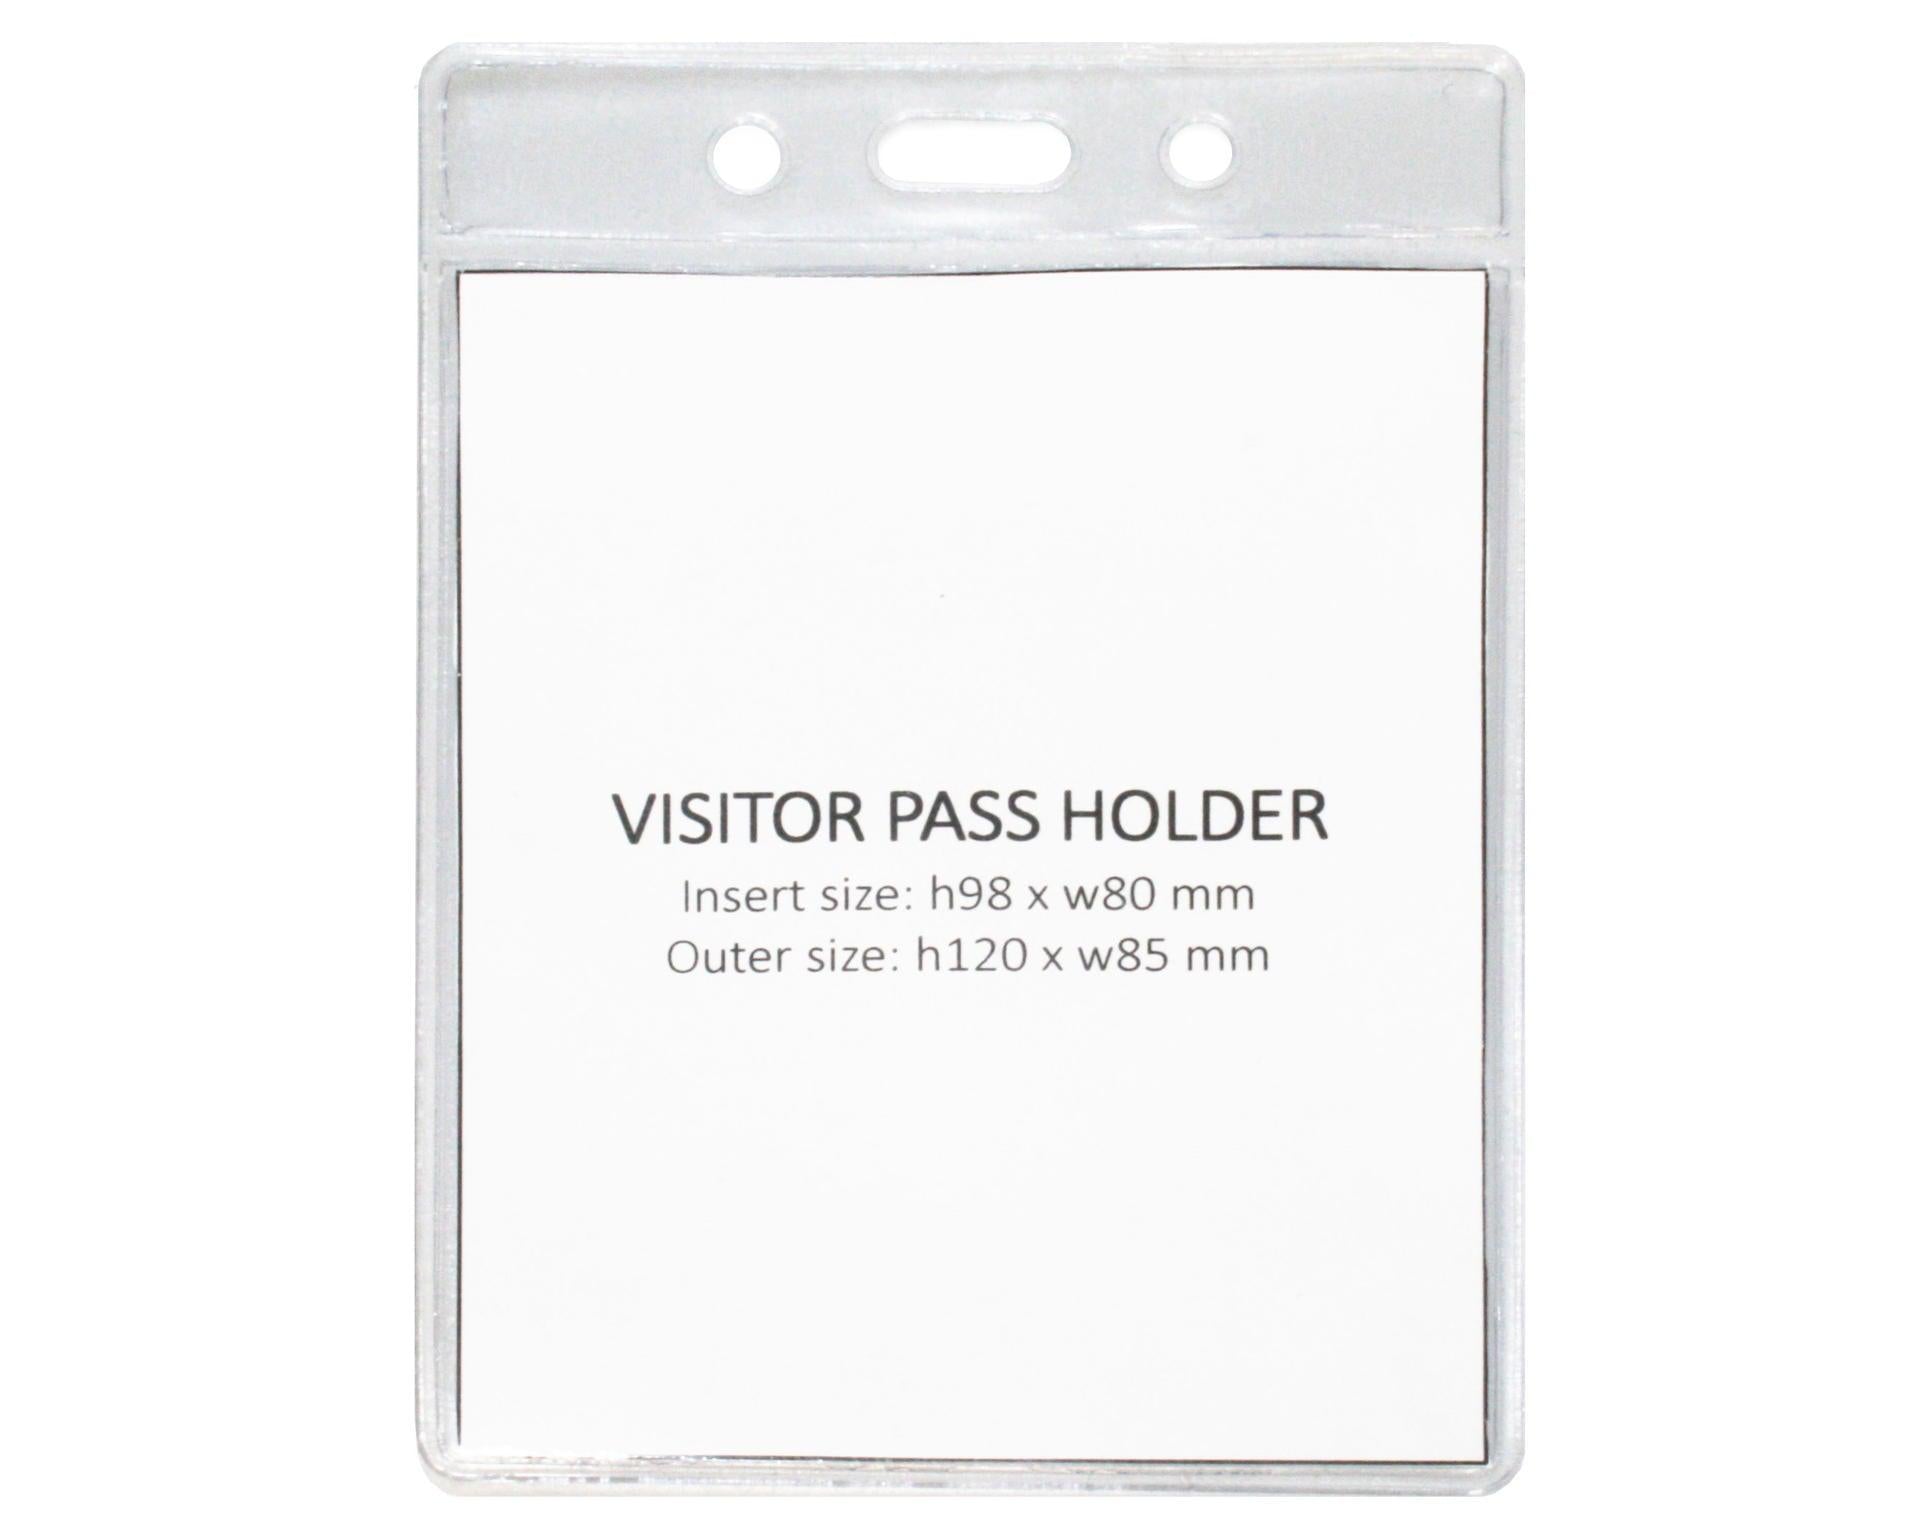 Clear Vinyl Visitor Card Holder, Eco Friendly Portrait - Promotions Only Lanyards